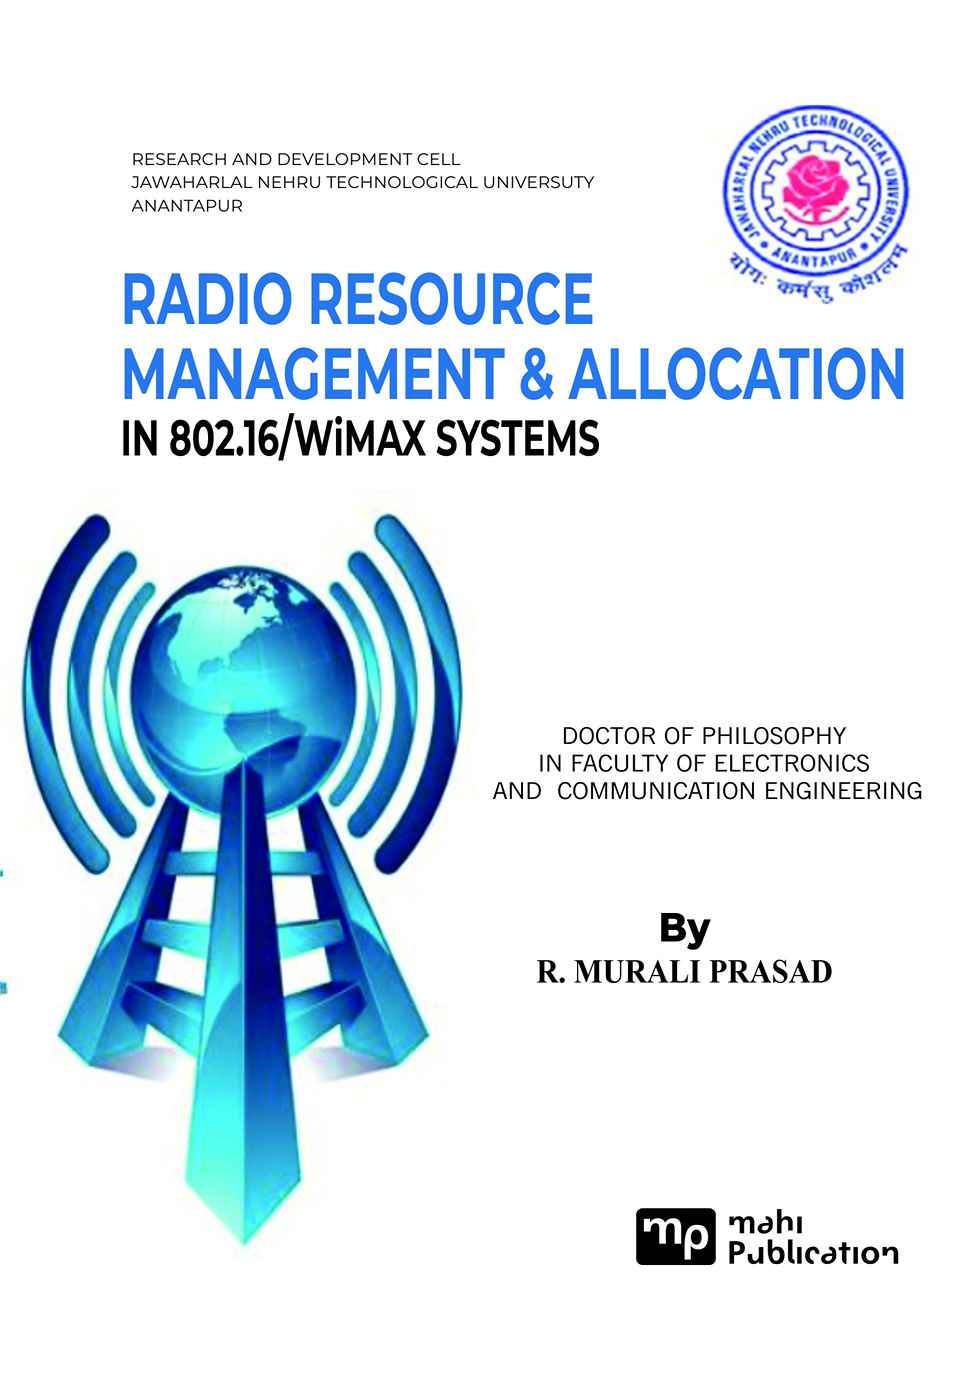 Radio Resource Management & Allocation In 802.16/wimax Systems